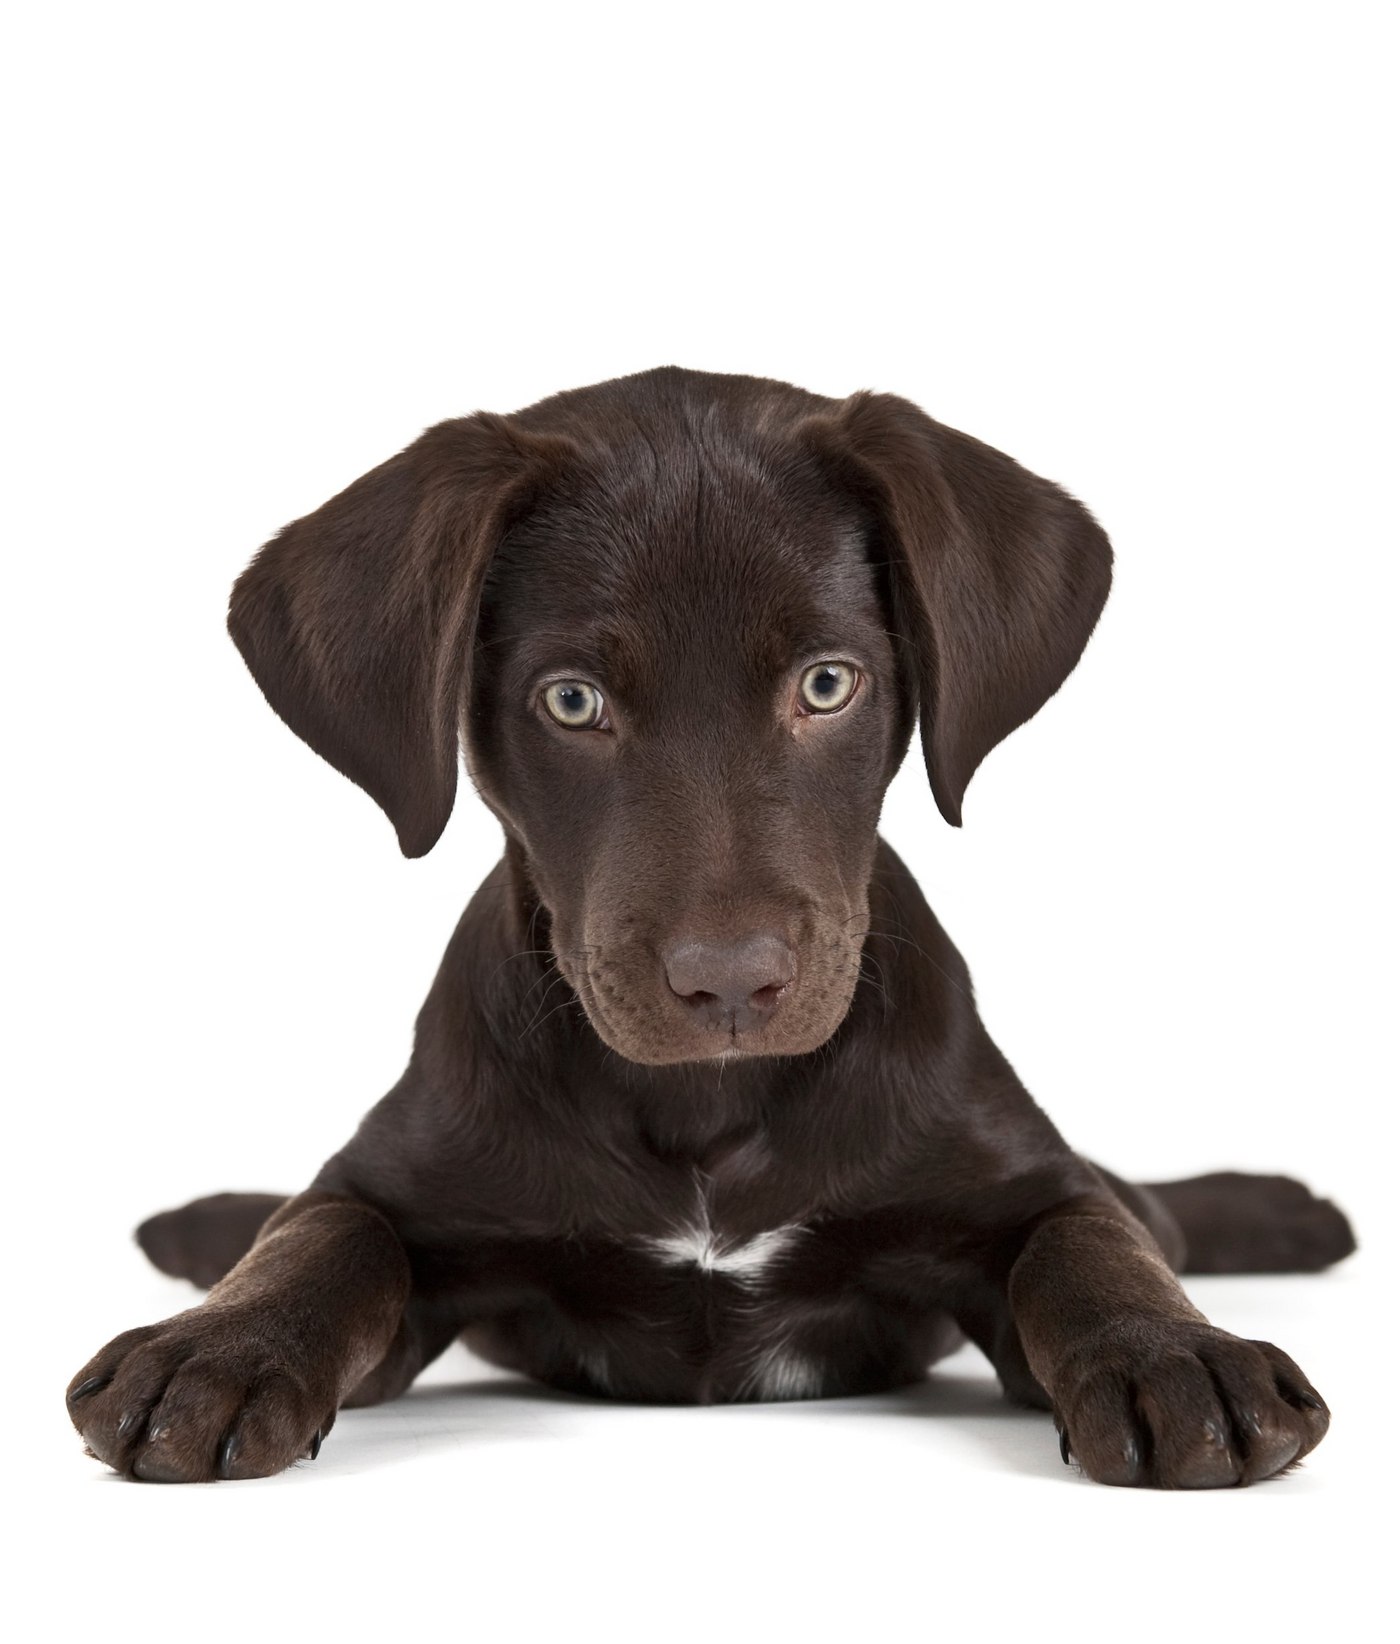 7 Reasons to Fear Free Puppies and Bundled Scanning Applications